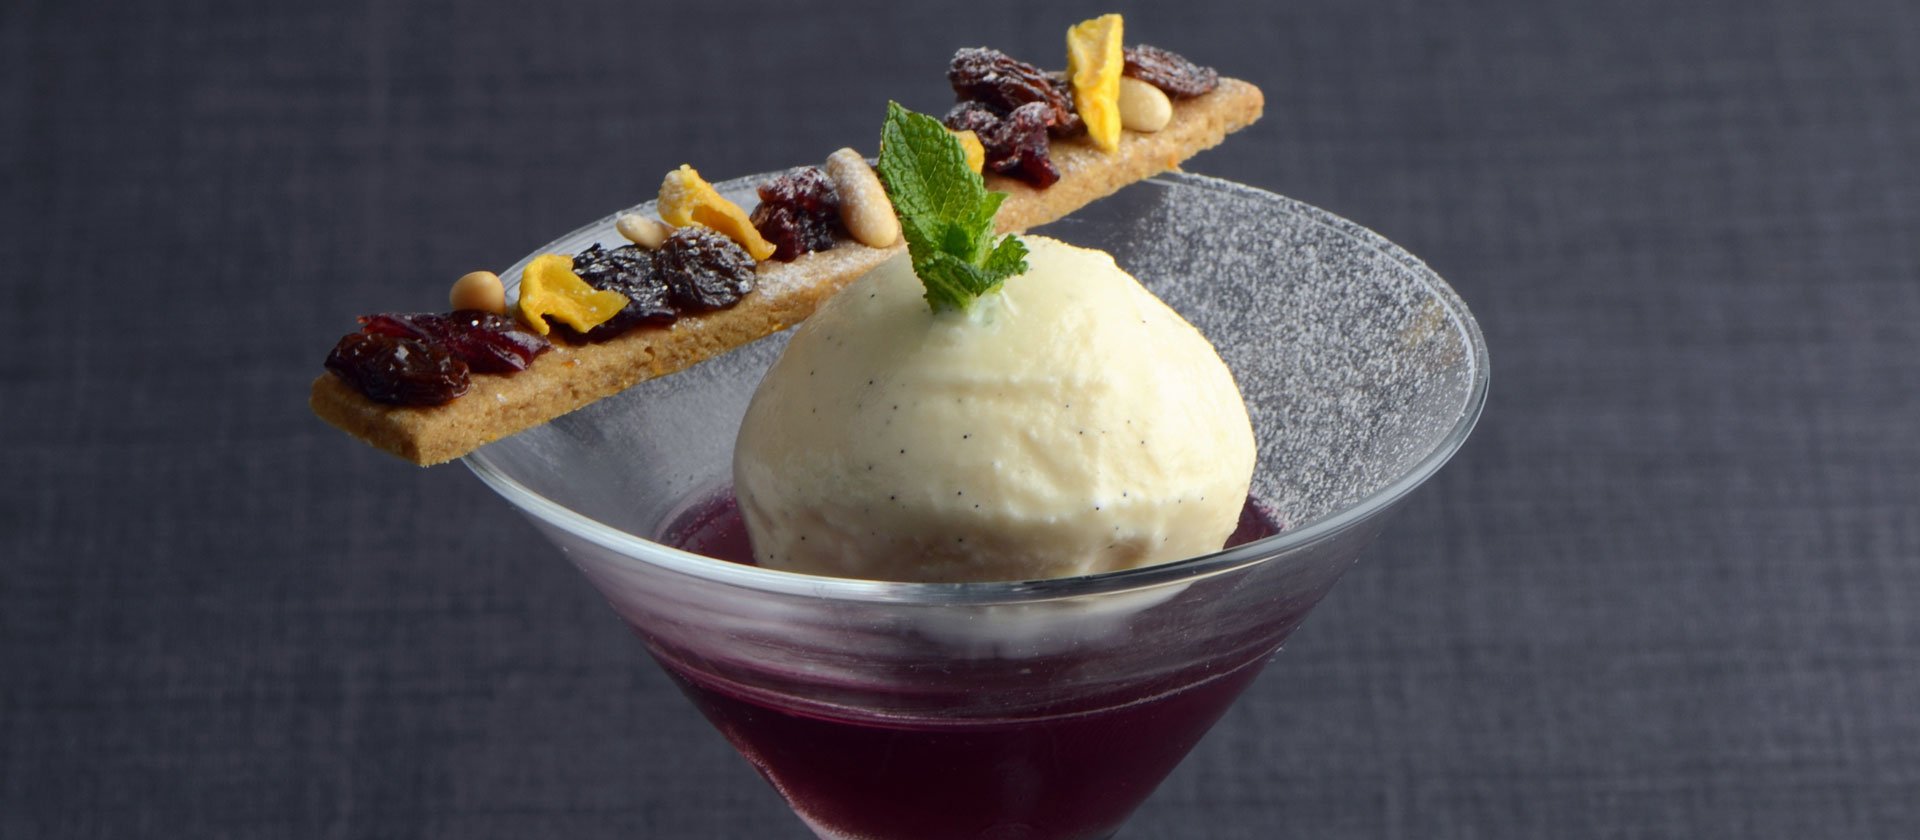 Mulled wine jelly, vanilla ice cream and speculoos biscuit with dried fruits and nuts